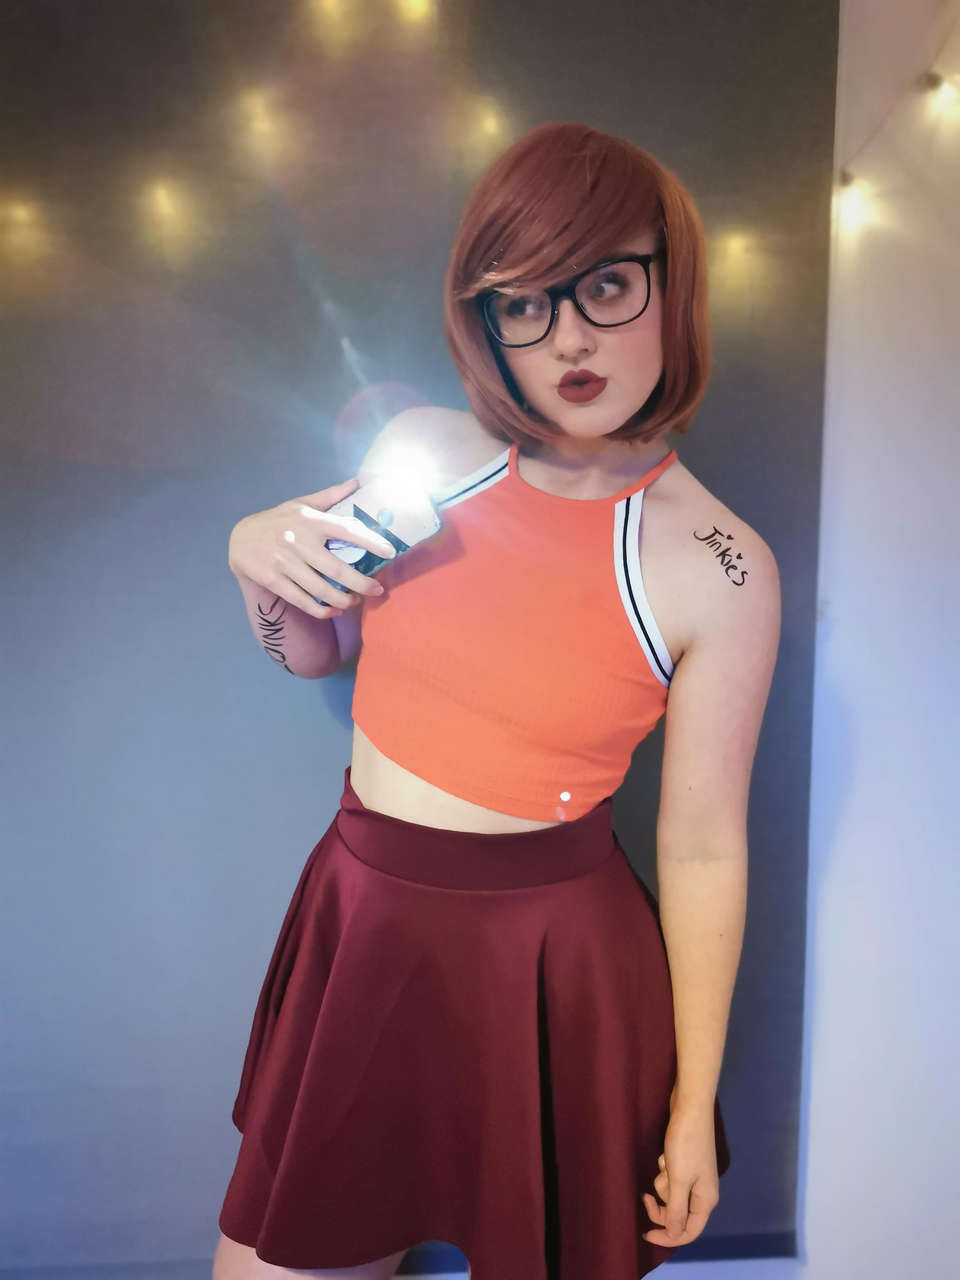 Self My Version Of Modern Velma Dinkley What Are Your Thought